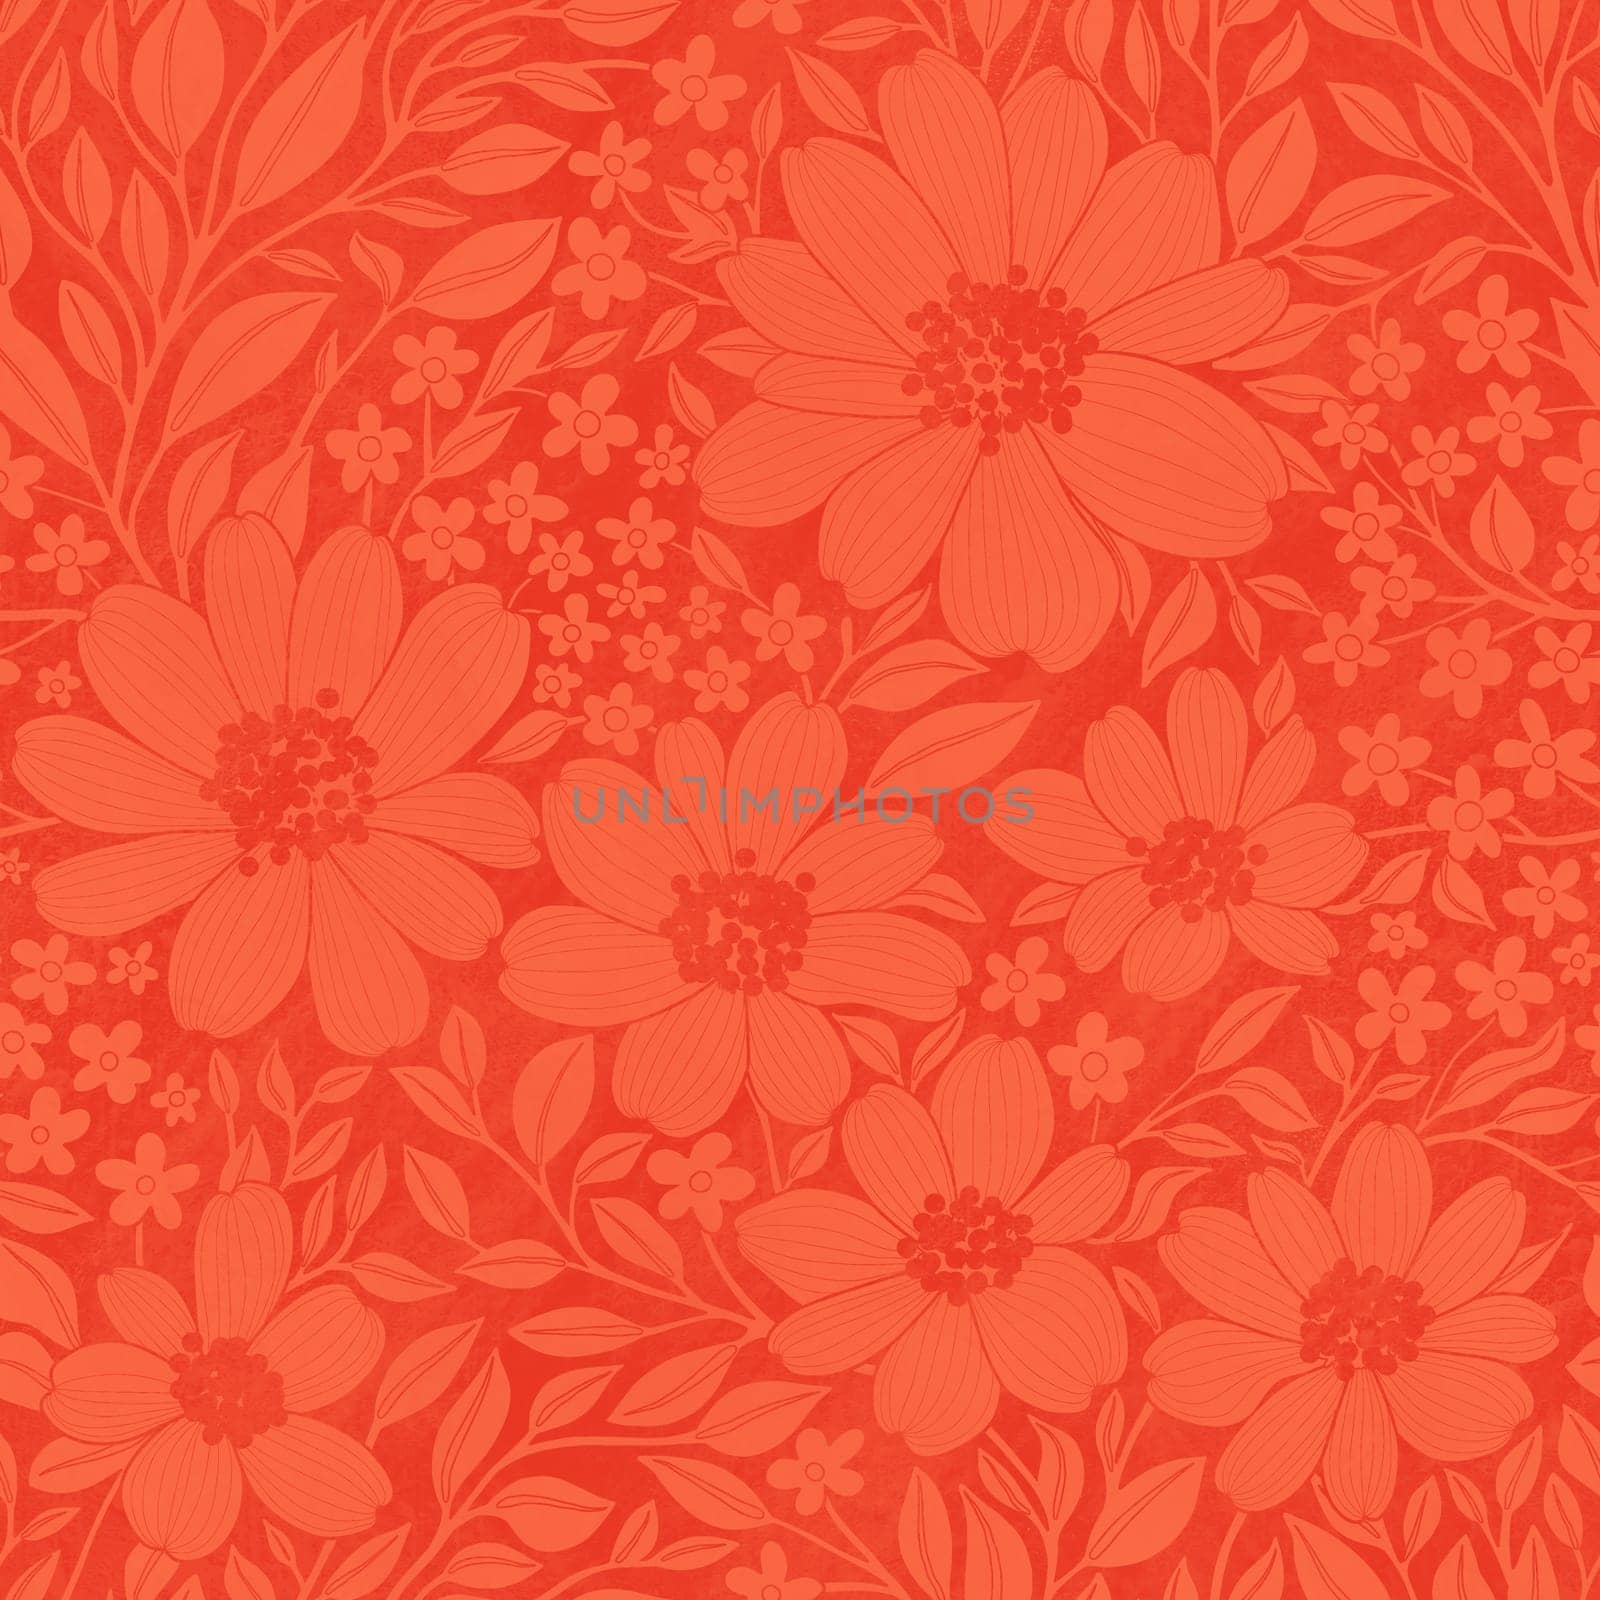 Floral Seamless Pattern of Red Flowers and Leaves on Red Tomato Backgroun with Texture, Greate for Wallpapers, Textiles, Papers, Prints, Fashion, Beauty Products, Wrappings, Package Design.